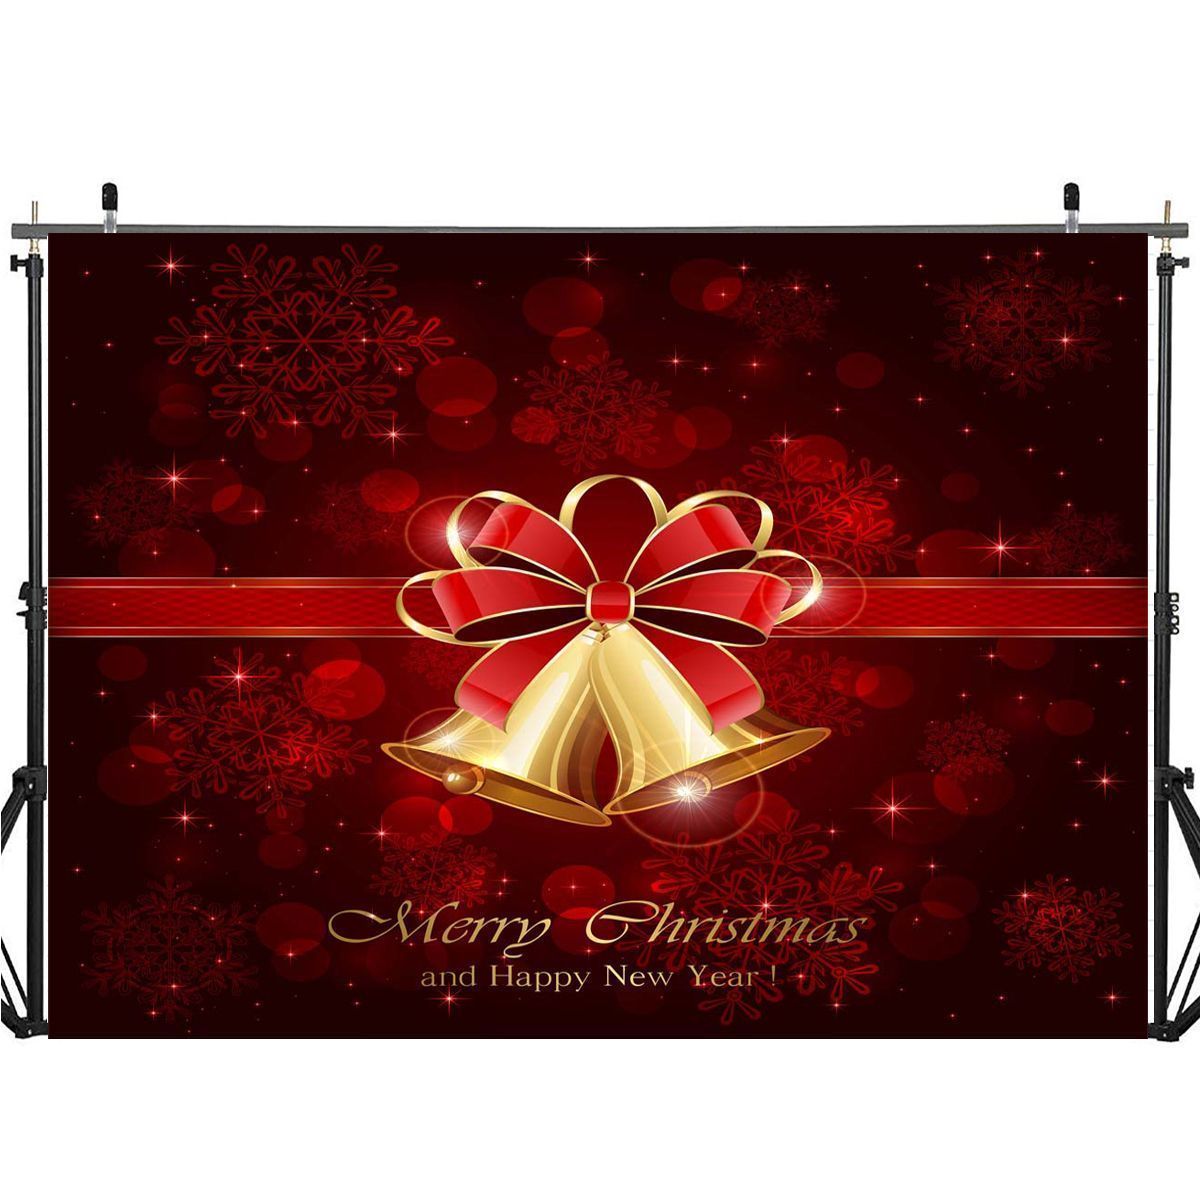 5x7FT-Vinyl-Merry-Christmas-Happy-New-Year-Red-Bell-Ring-Photography-Backdrop-Background-Studio-Prop-1574722